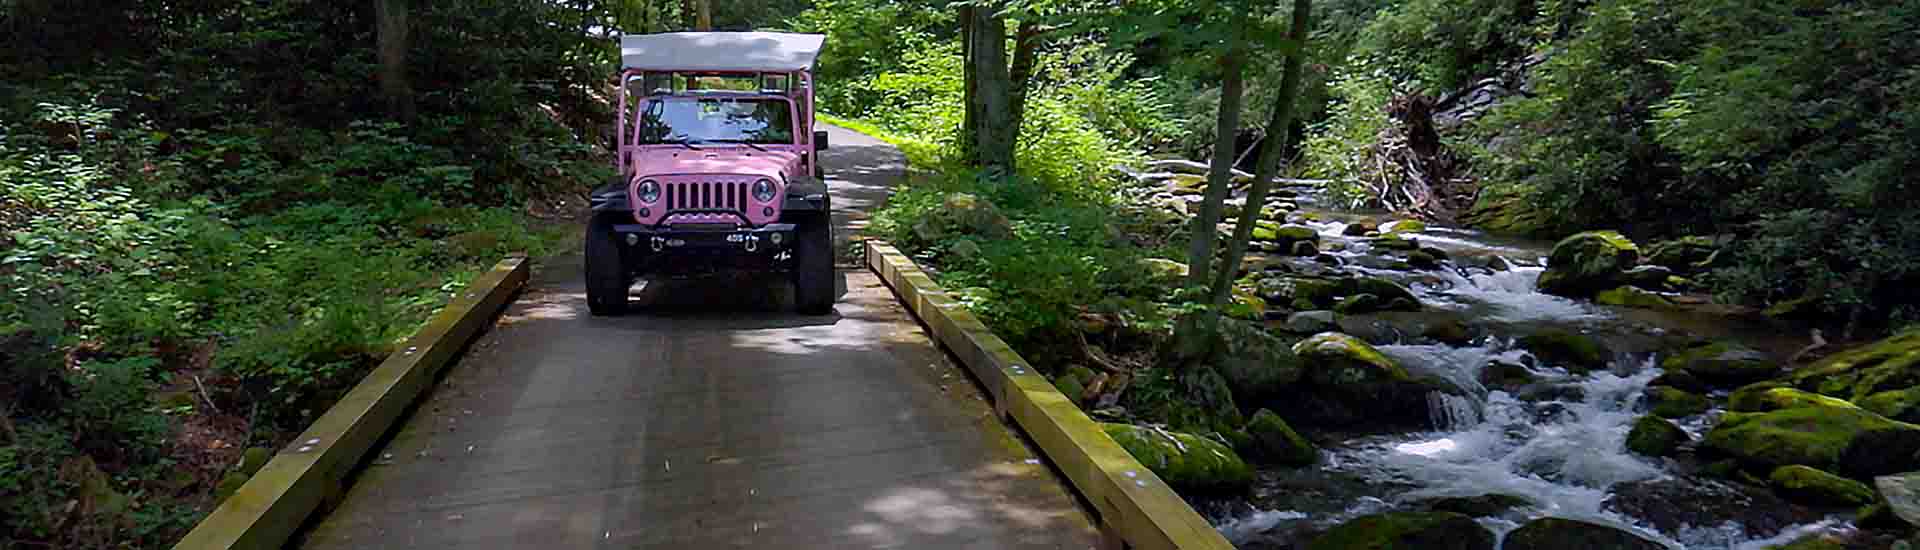 Pink® Jeep® Wrangler traveling along the Roaring Fork Motor Nature Trail with flowing stream to right, GSMNP